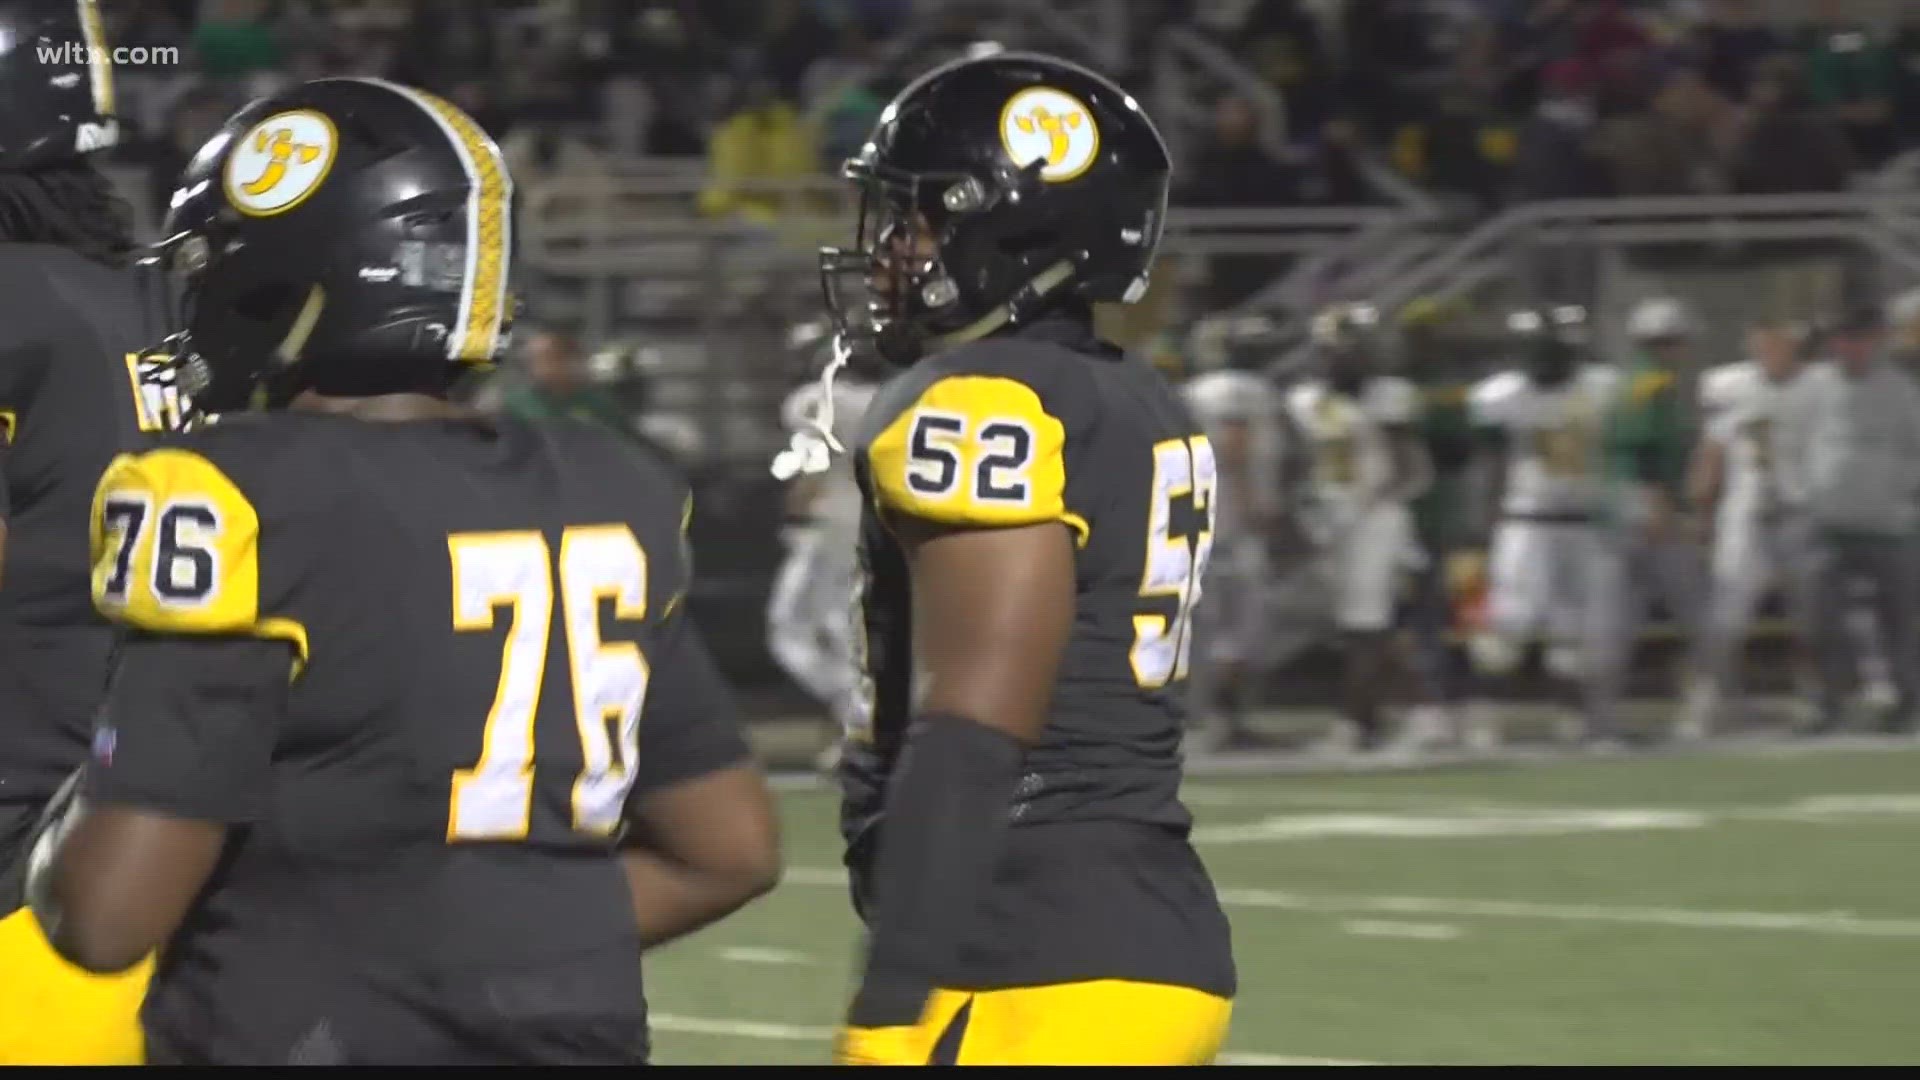 Irmo offensive lineman BJ Ham has been a part of the resurgence of Yellow Jacket football, while also maintaining a solid grade point average.